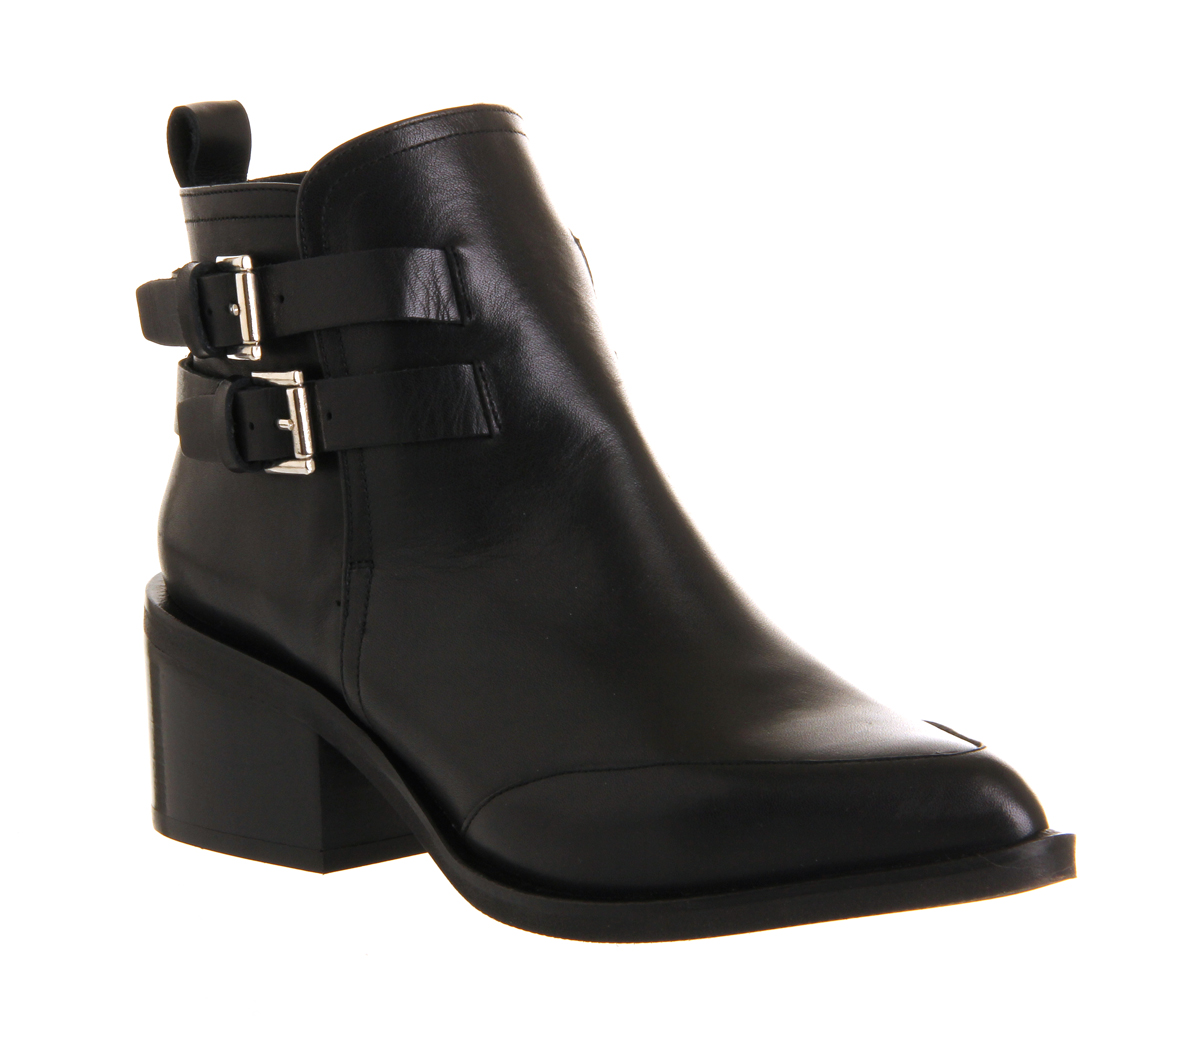 OFFICEMarvel Double Buckle bootsBlack Leather